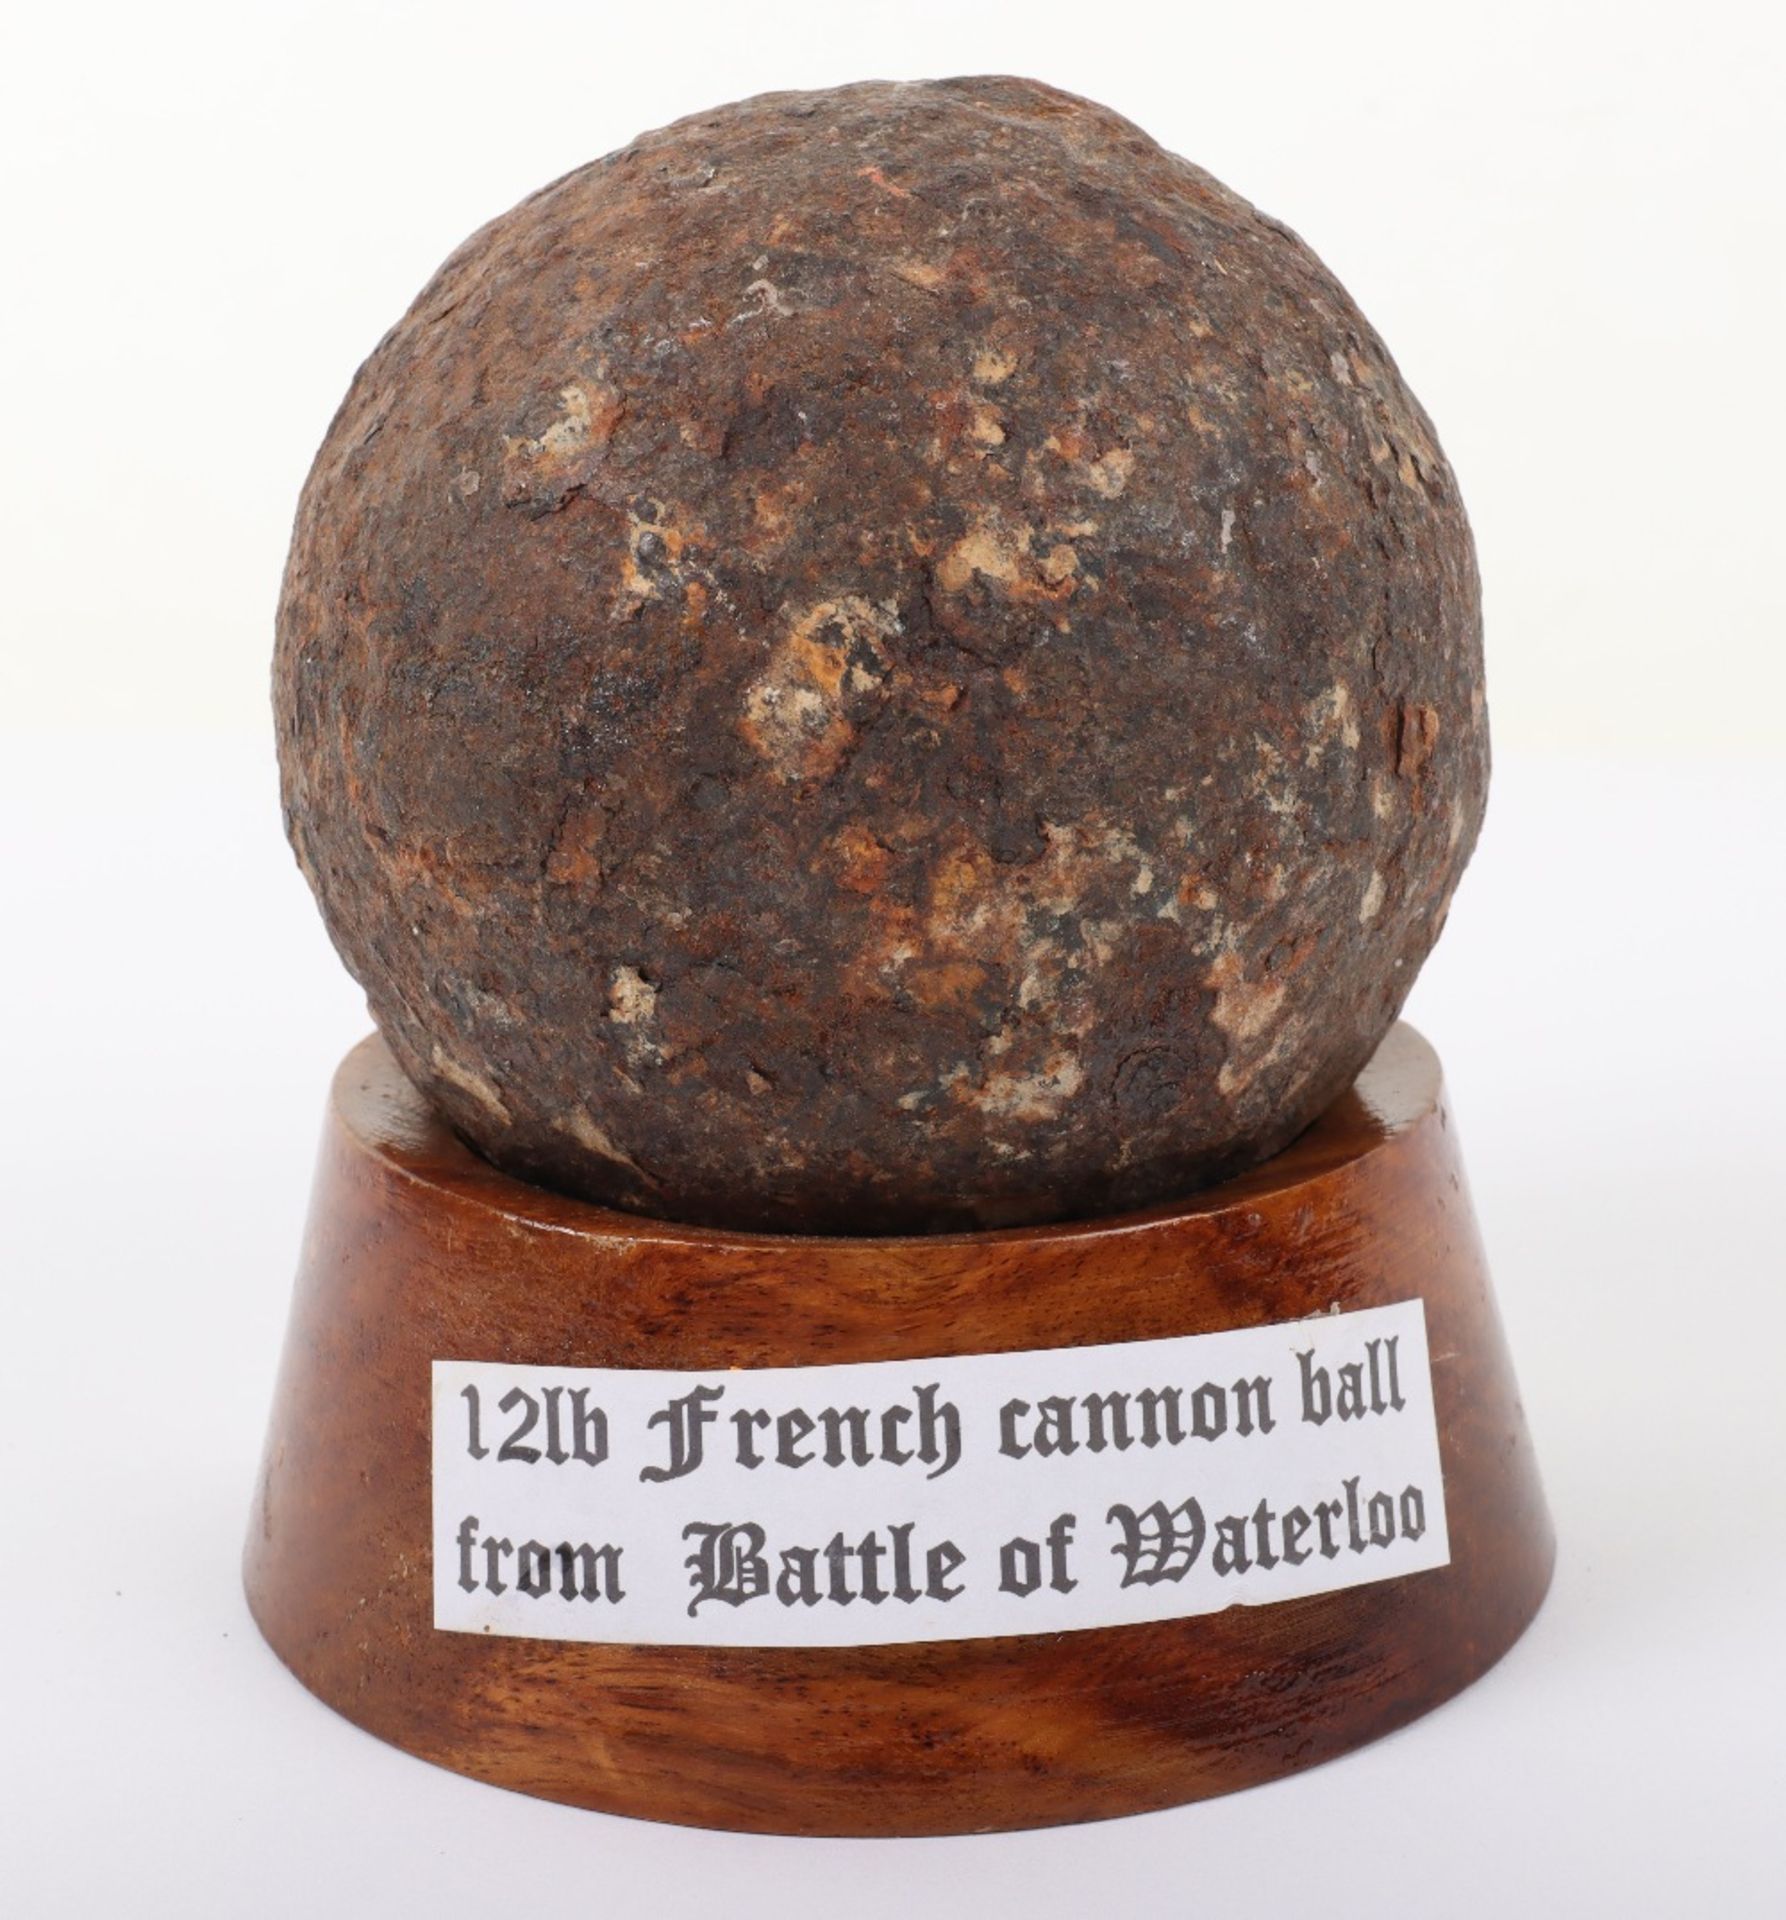 Battle of Waterloo Battlefield Excavated 12lb French Cannon Ball - Image 3 of 3